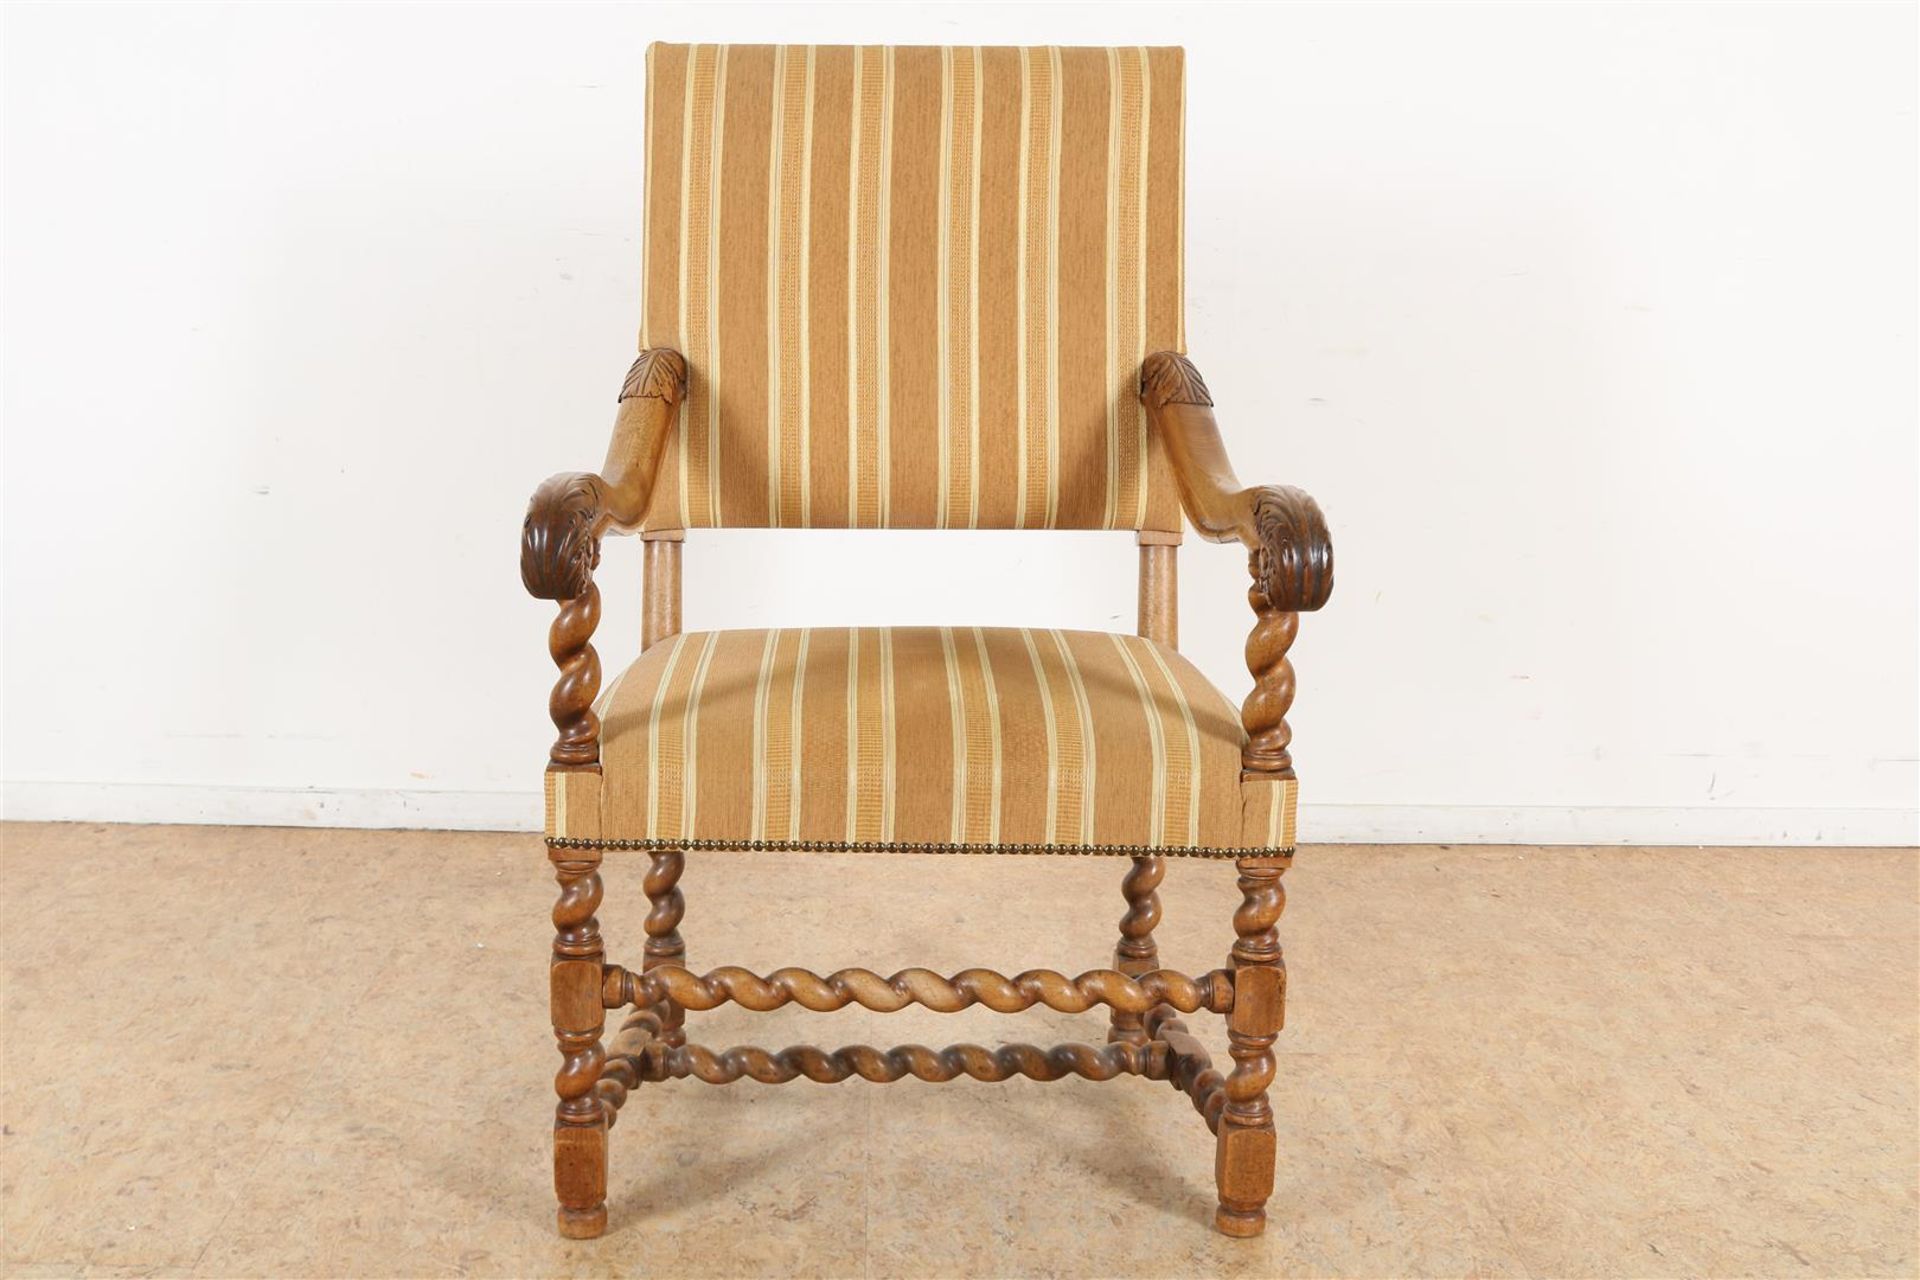 Walnut armchair with striped upholstery and carved acanthus leaves on the armrest.